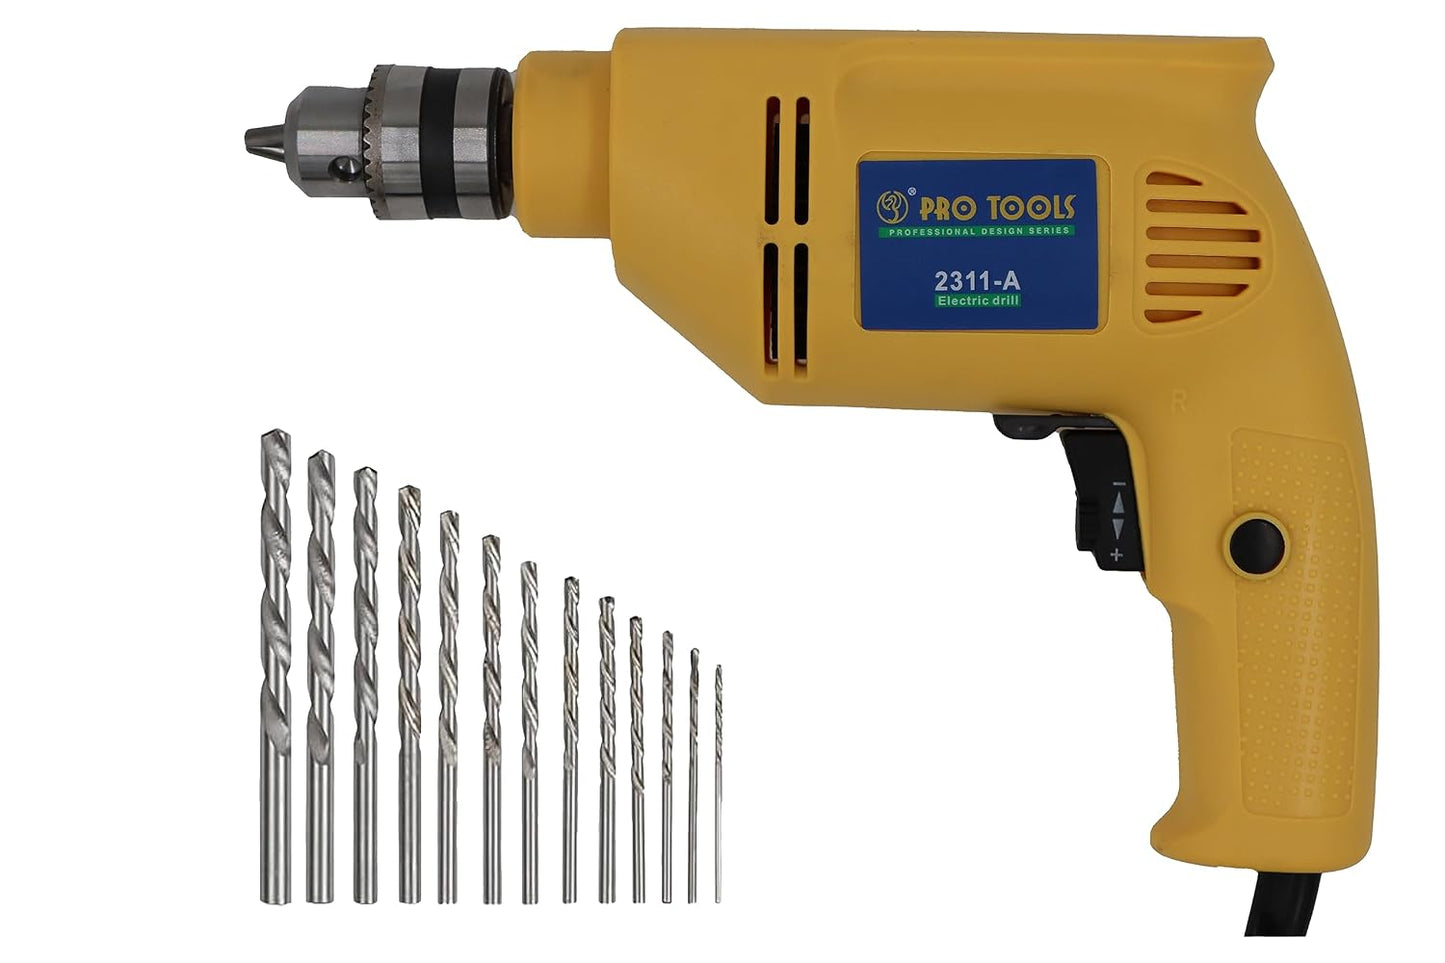 PRO TOOLS 2311-A, 10mm, 430W Electric Drill Machine, Copper Armature, 10mm Chuck, 2800 RPM, 2 Mode Selector, Forward/Reverse with Variable Speed with 13 Pieces Bits